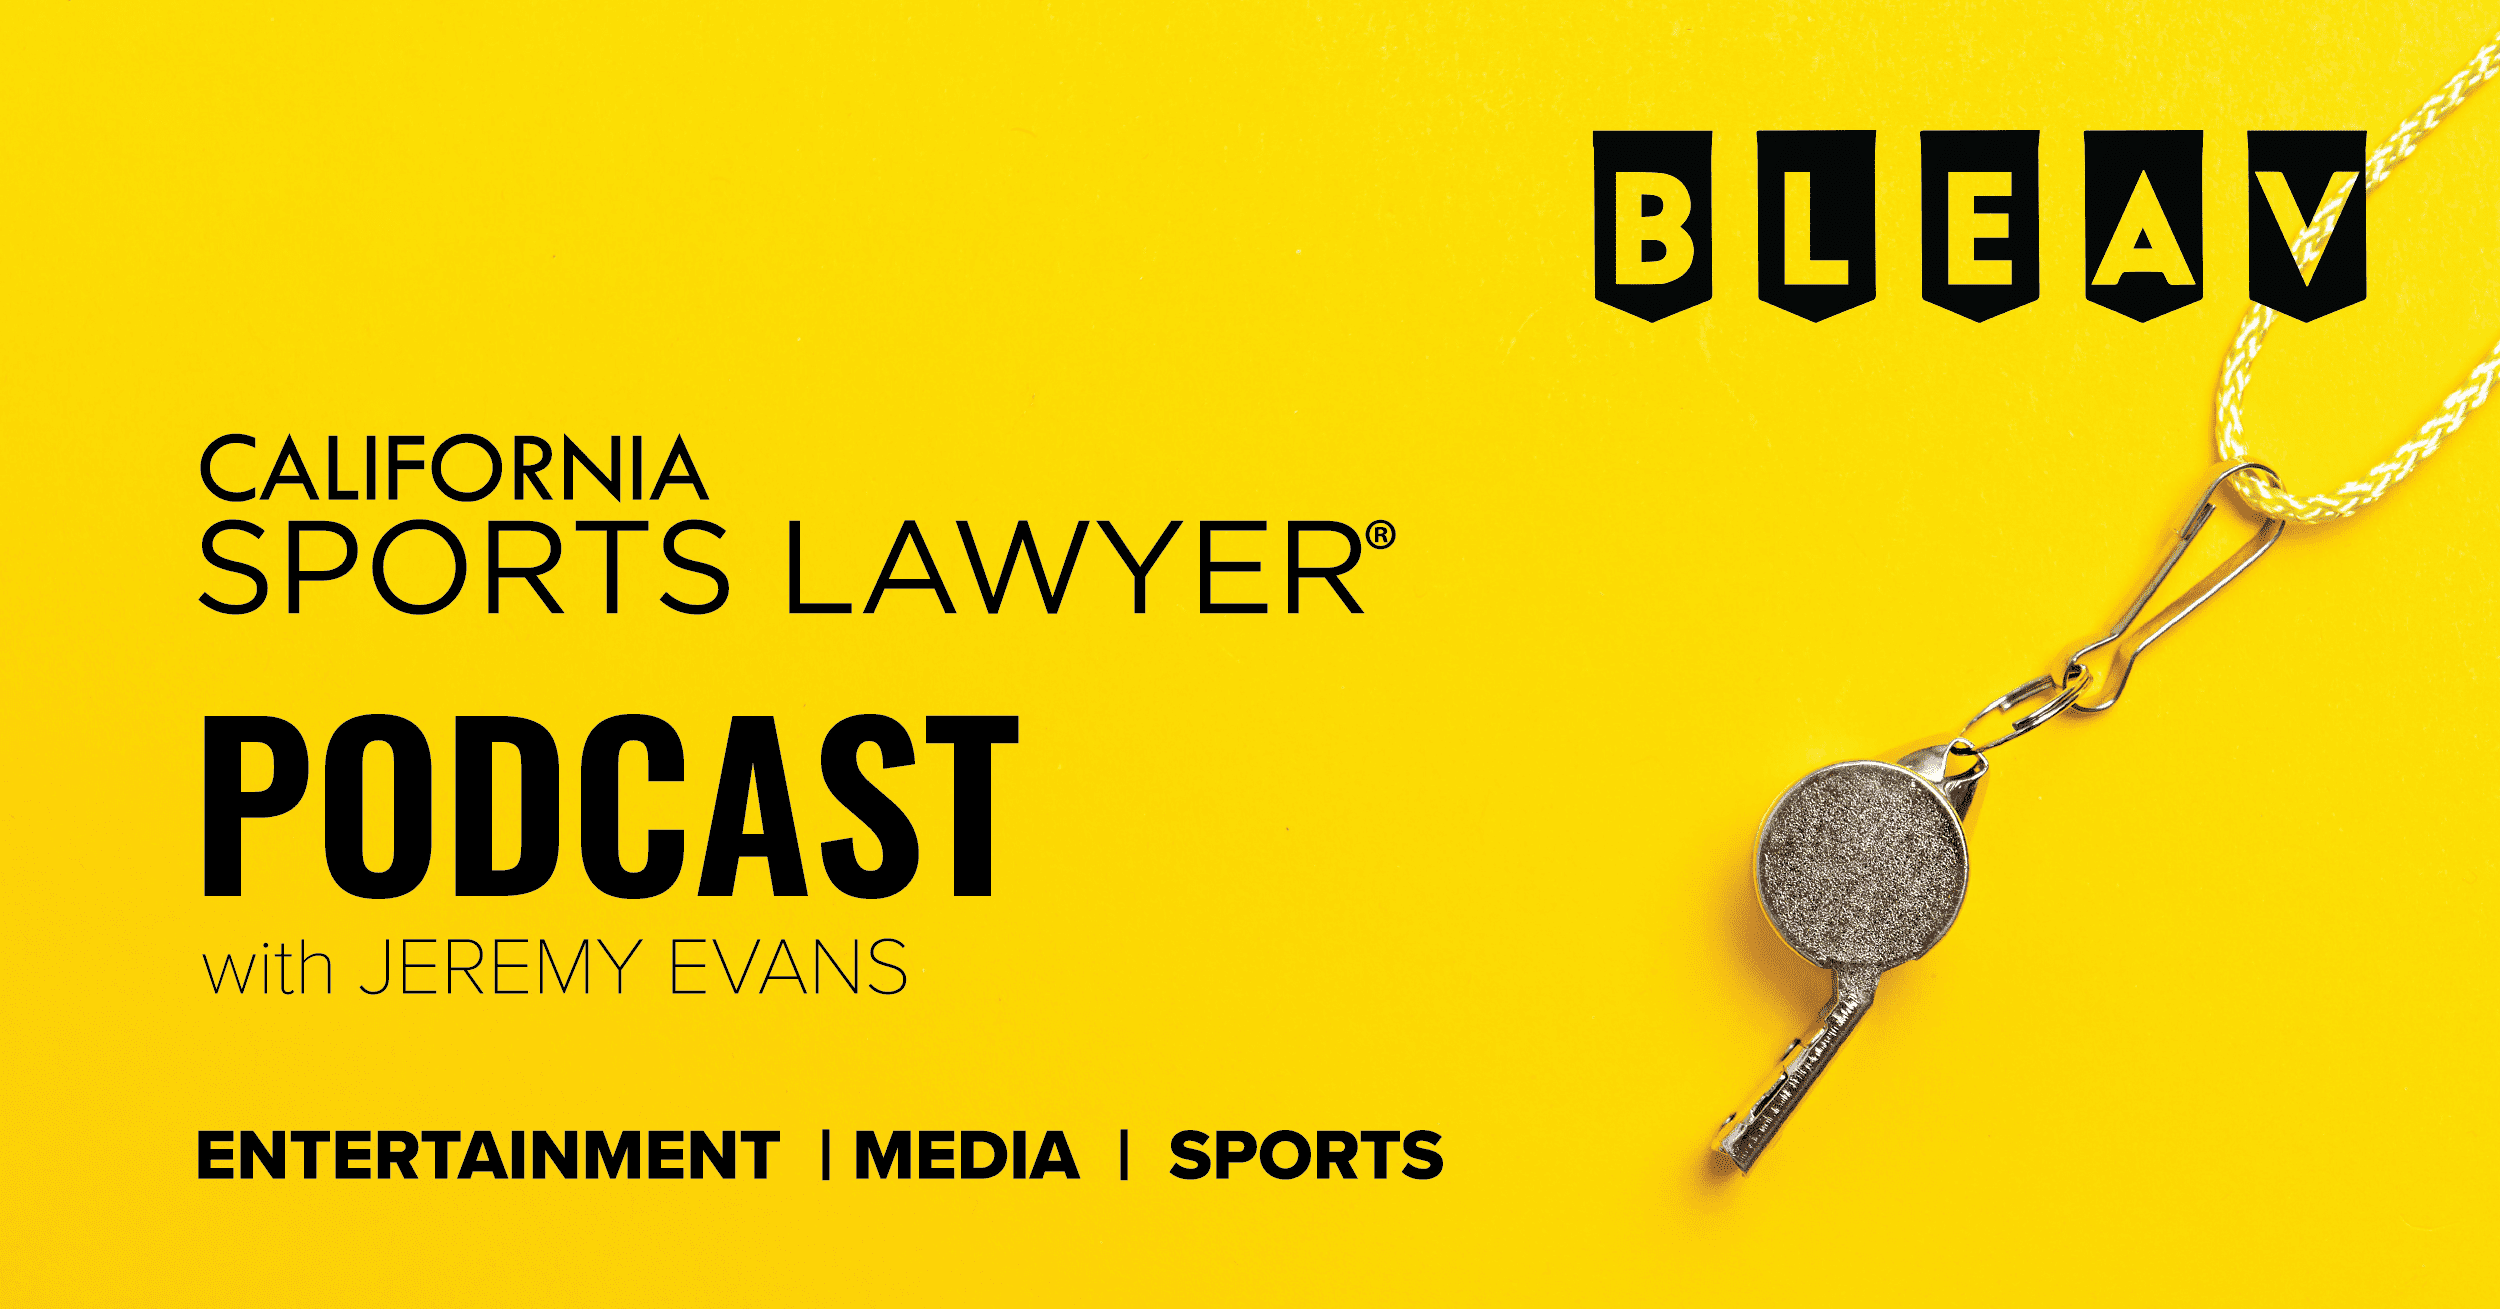 California Sports Lawyer® Podcast with Jeremy Evans: Media and Content Creation and Distribution has Changed